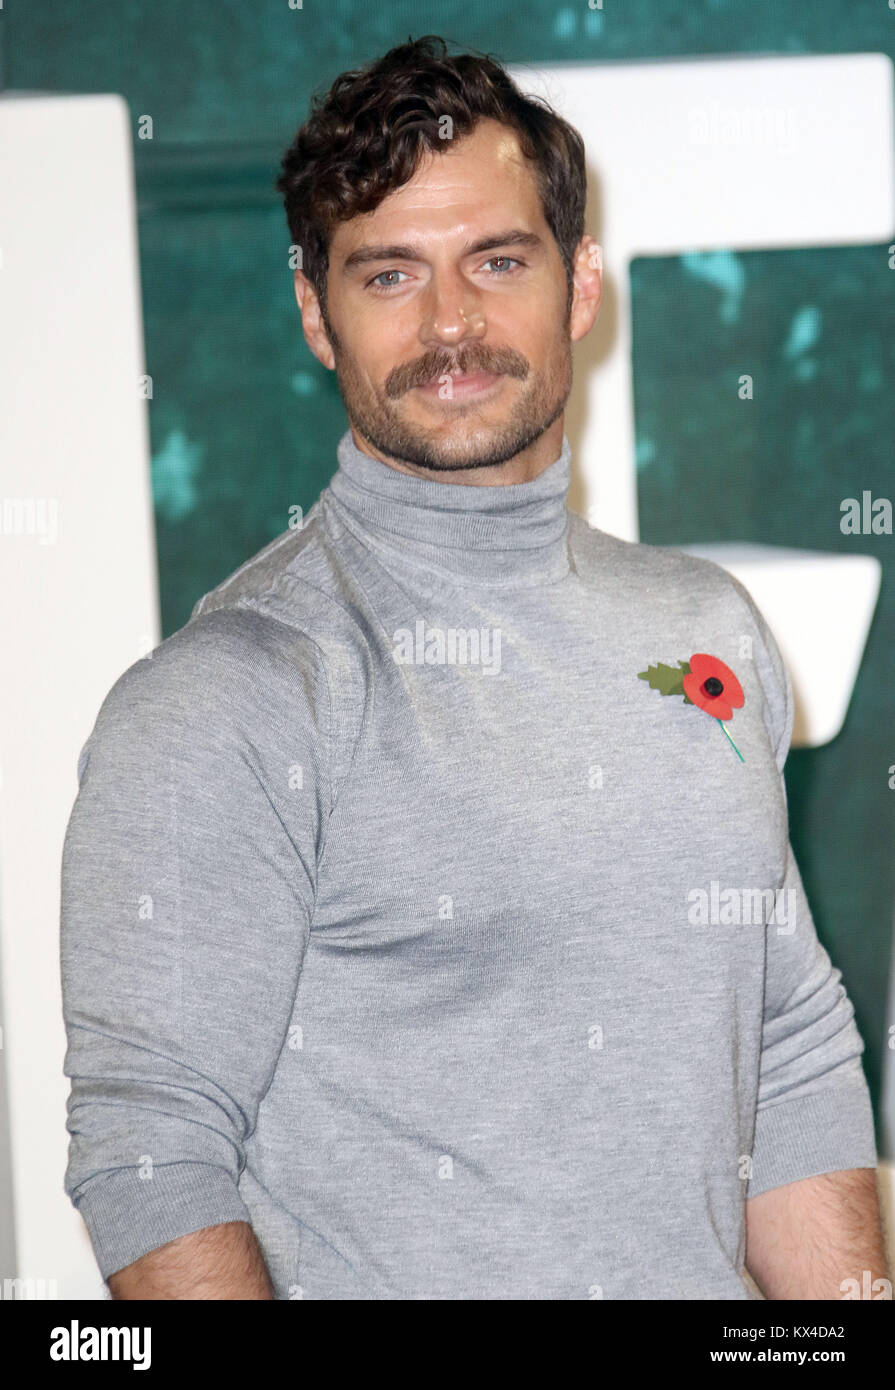 Nov 04, 2017 - Henry Cavill attending 'Justice League' Photocall, The College, Southampton Row in London, England, UK Stock Photo